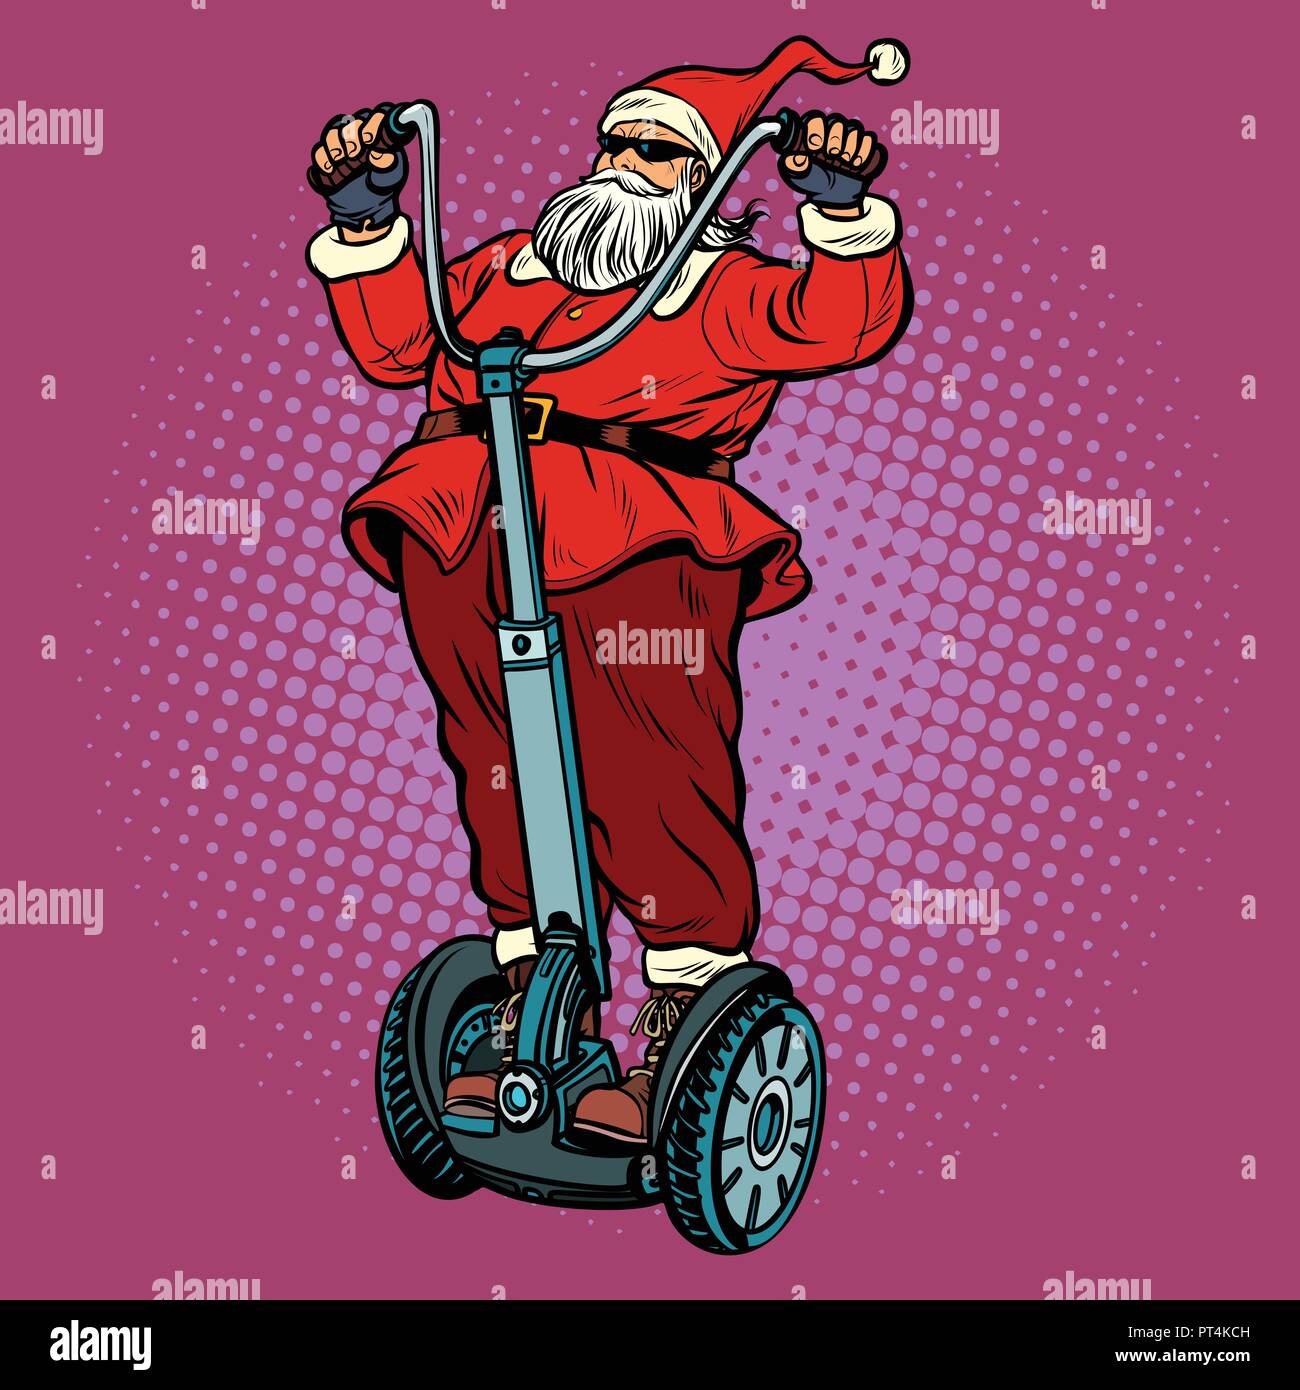 Santa Claus biker with Christmas gifts rides an electric scooter. Pop art retro vector illustration vintage kitsch Stock Vector